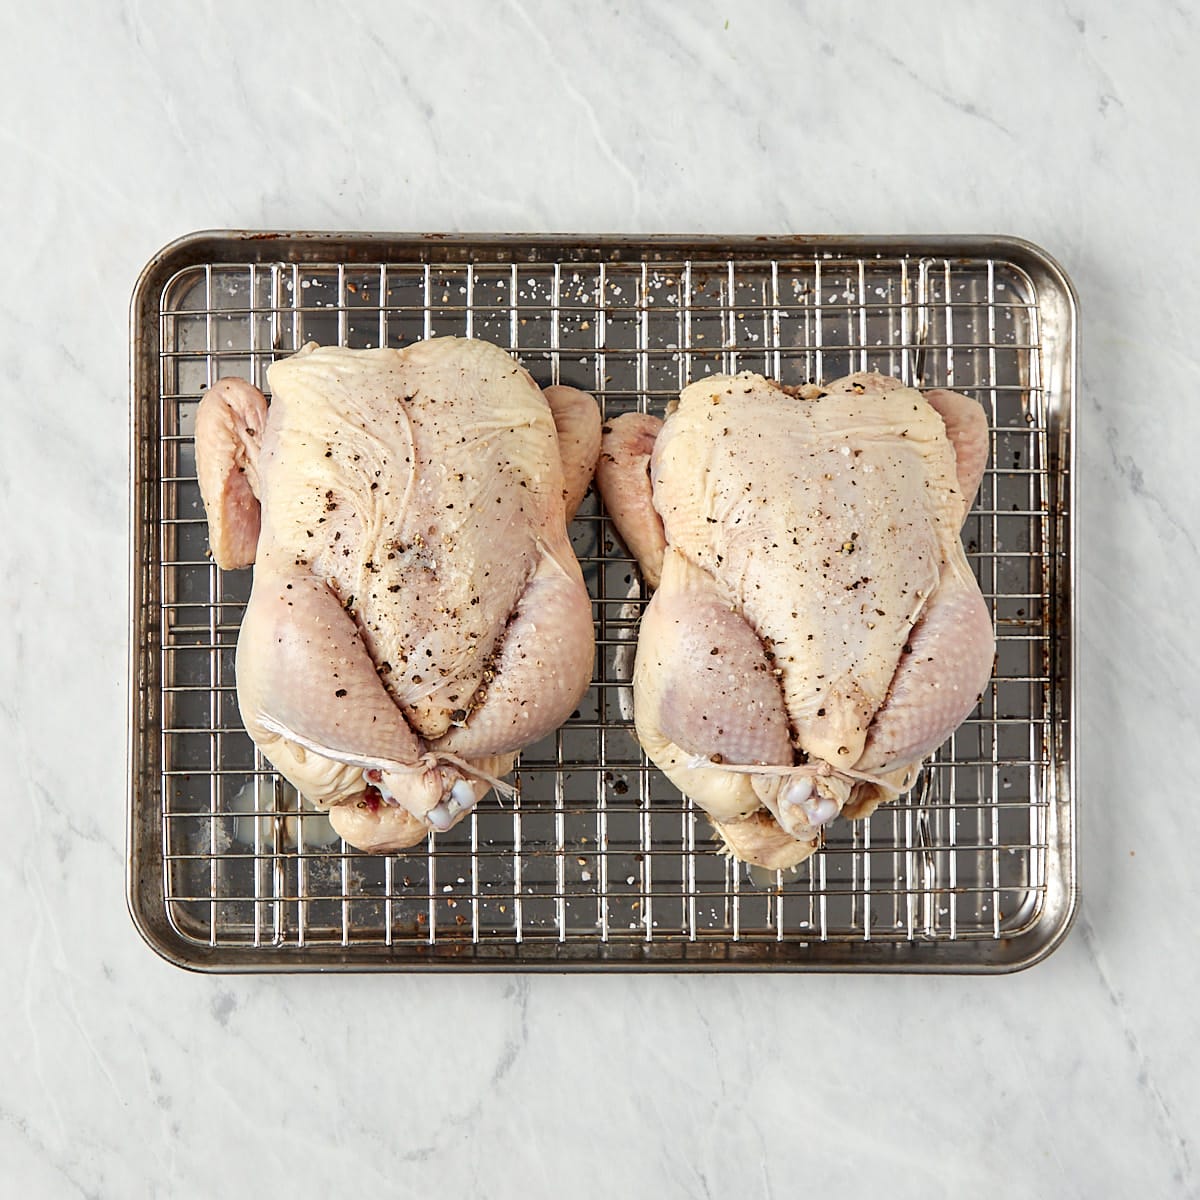 stuffed uncooked Cornish game hens on a wire rack-lined baking pan.